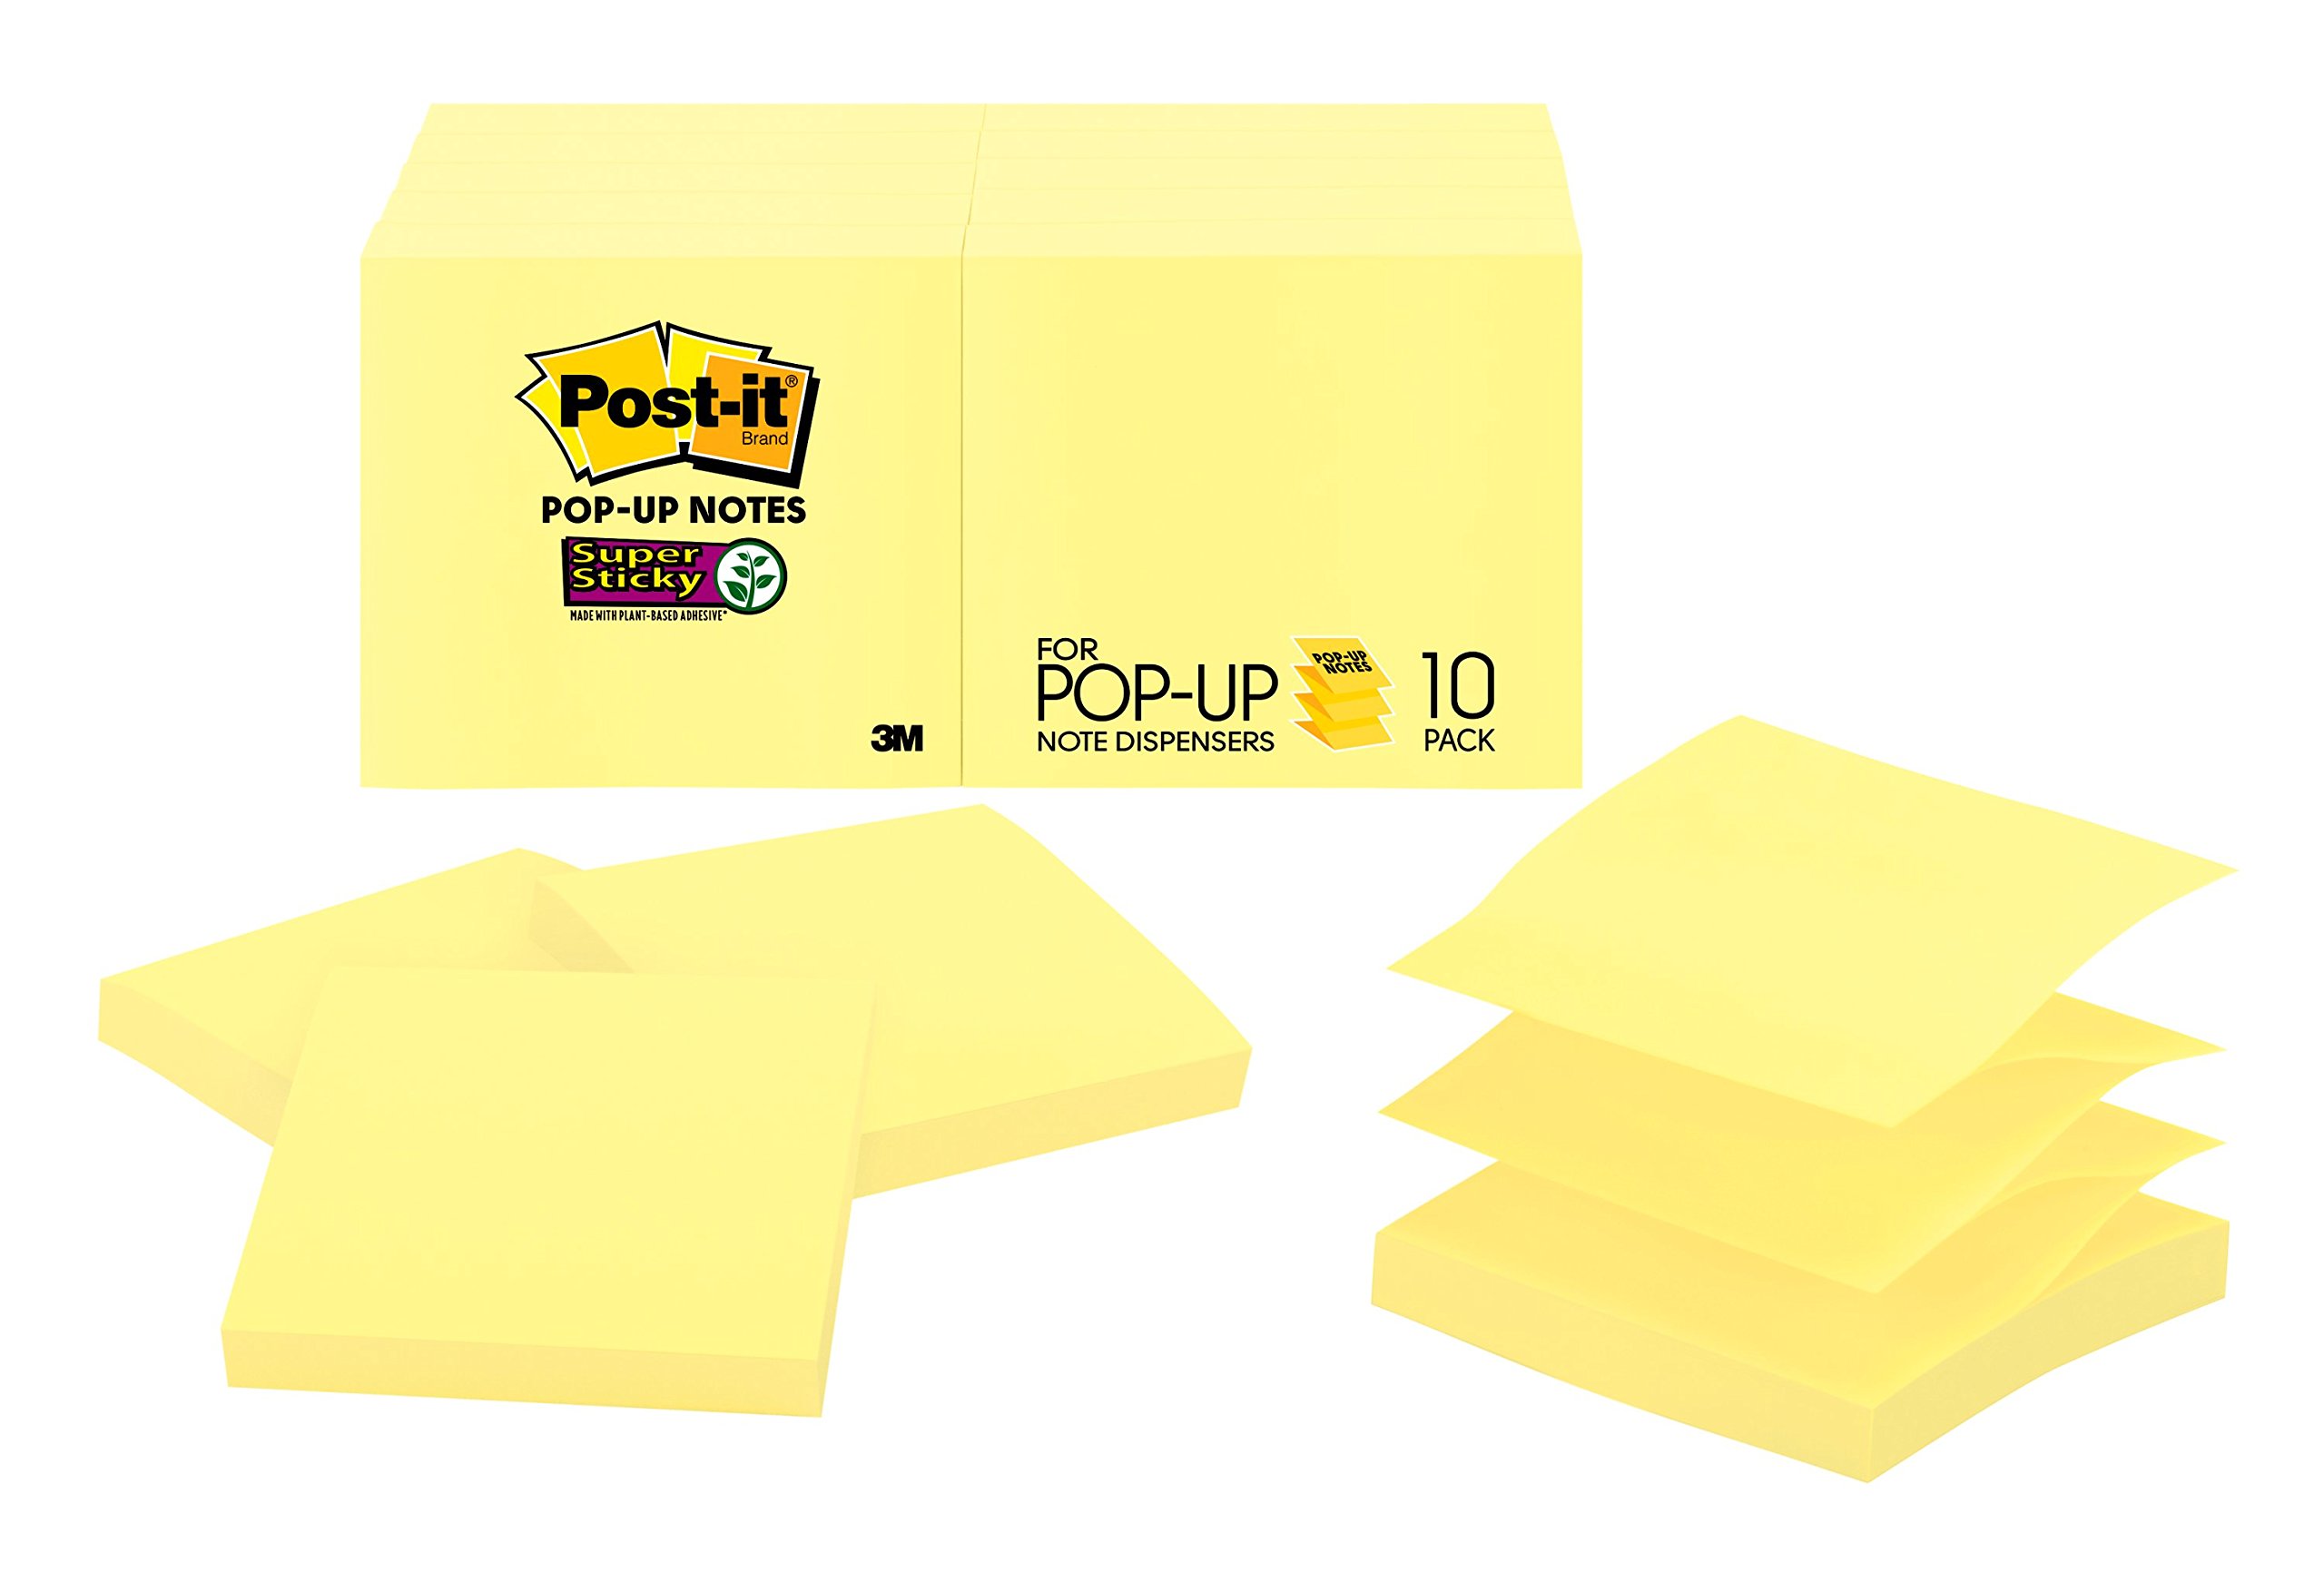 Post-it Super Sticky Pop-up Notes, 3x3 in, 10 Pads, 2x the Sticking Power, Canary Yellow, Recyclable (R330-10SSCY)